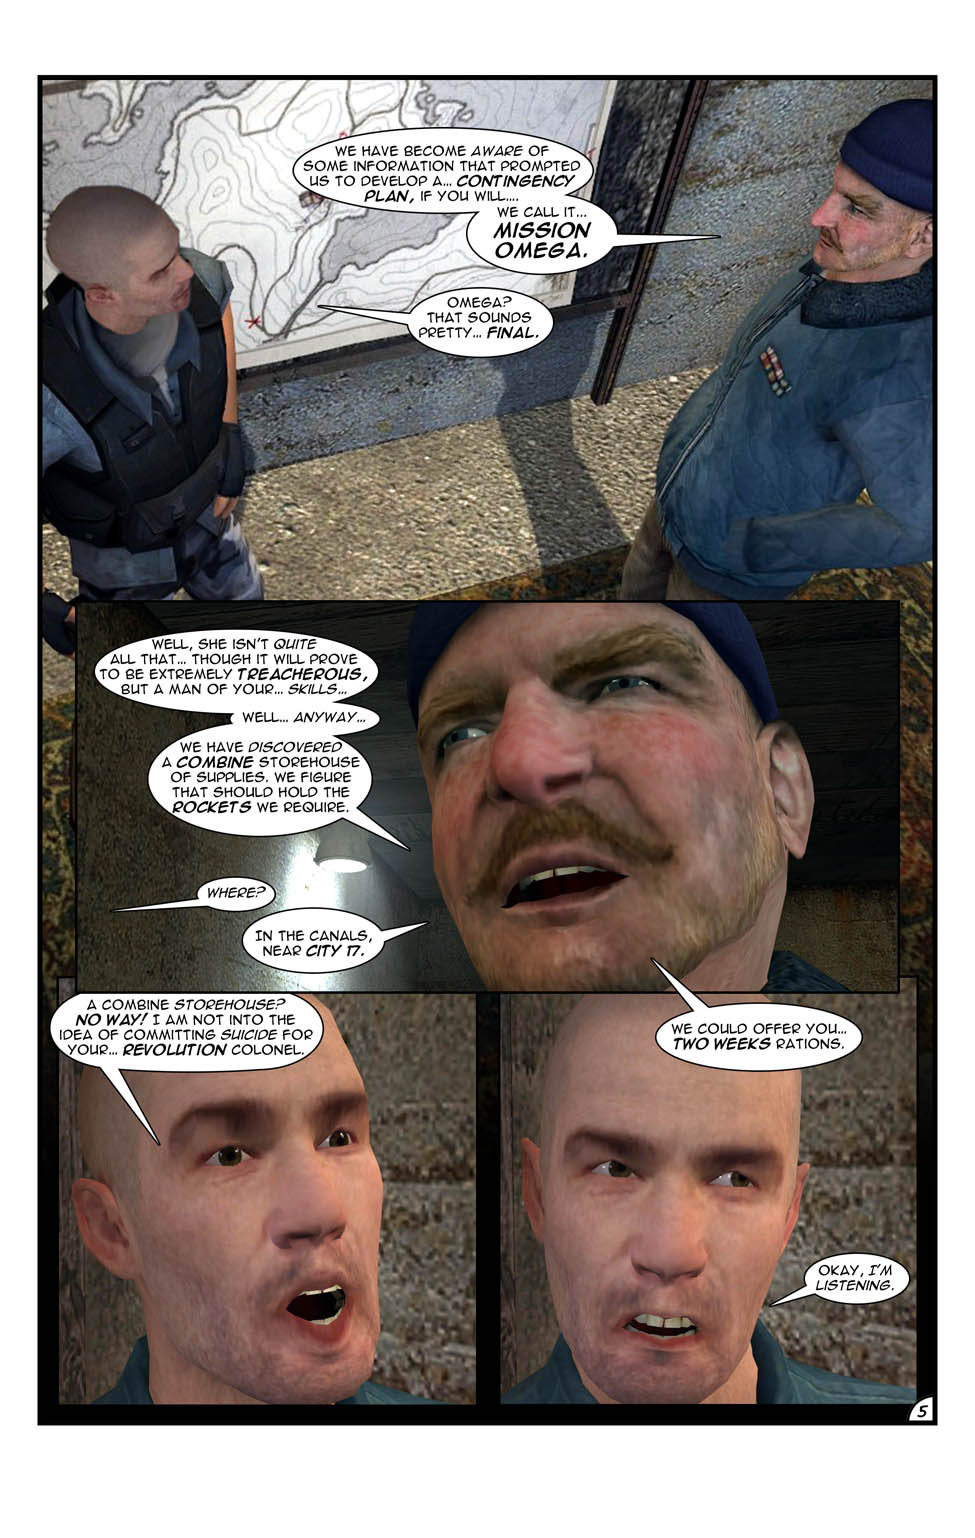 Colonel Cubbage tells Jack about a contingency plan by the name of Mission Omega. They have discovered a Combine storehouse of supplies near the City 17 canals where Jack might be able to find some rockets. Jack is hesitant at first to raid a storehouse, but the Colonel offers him two weeks' worth of rations.